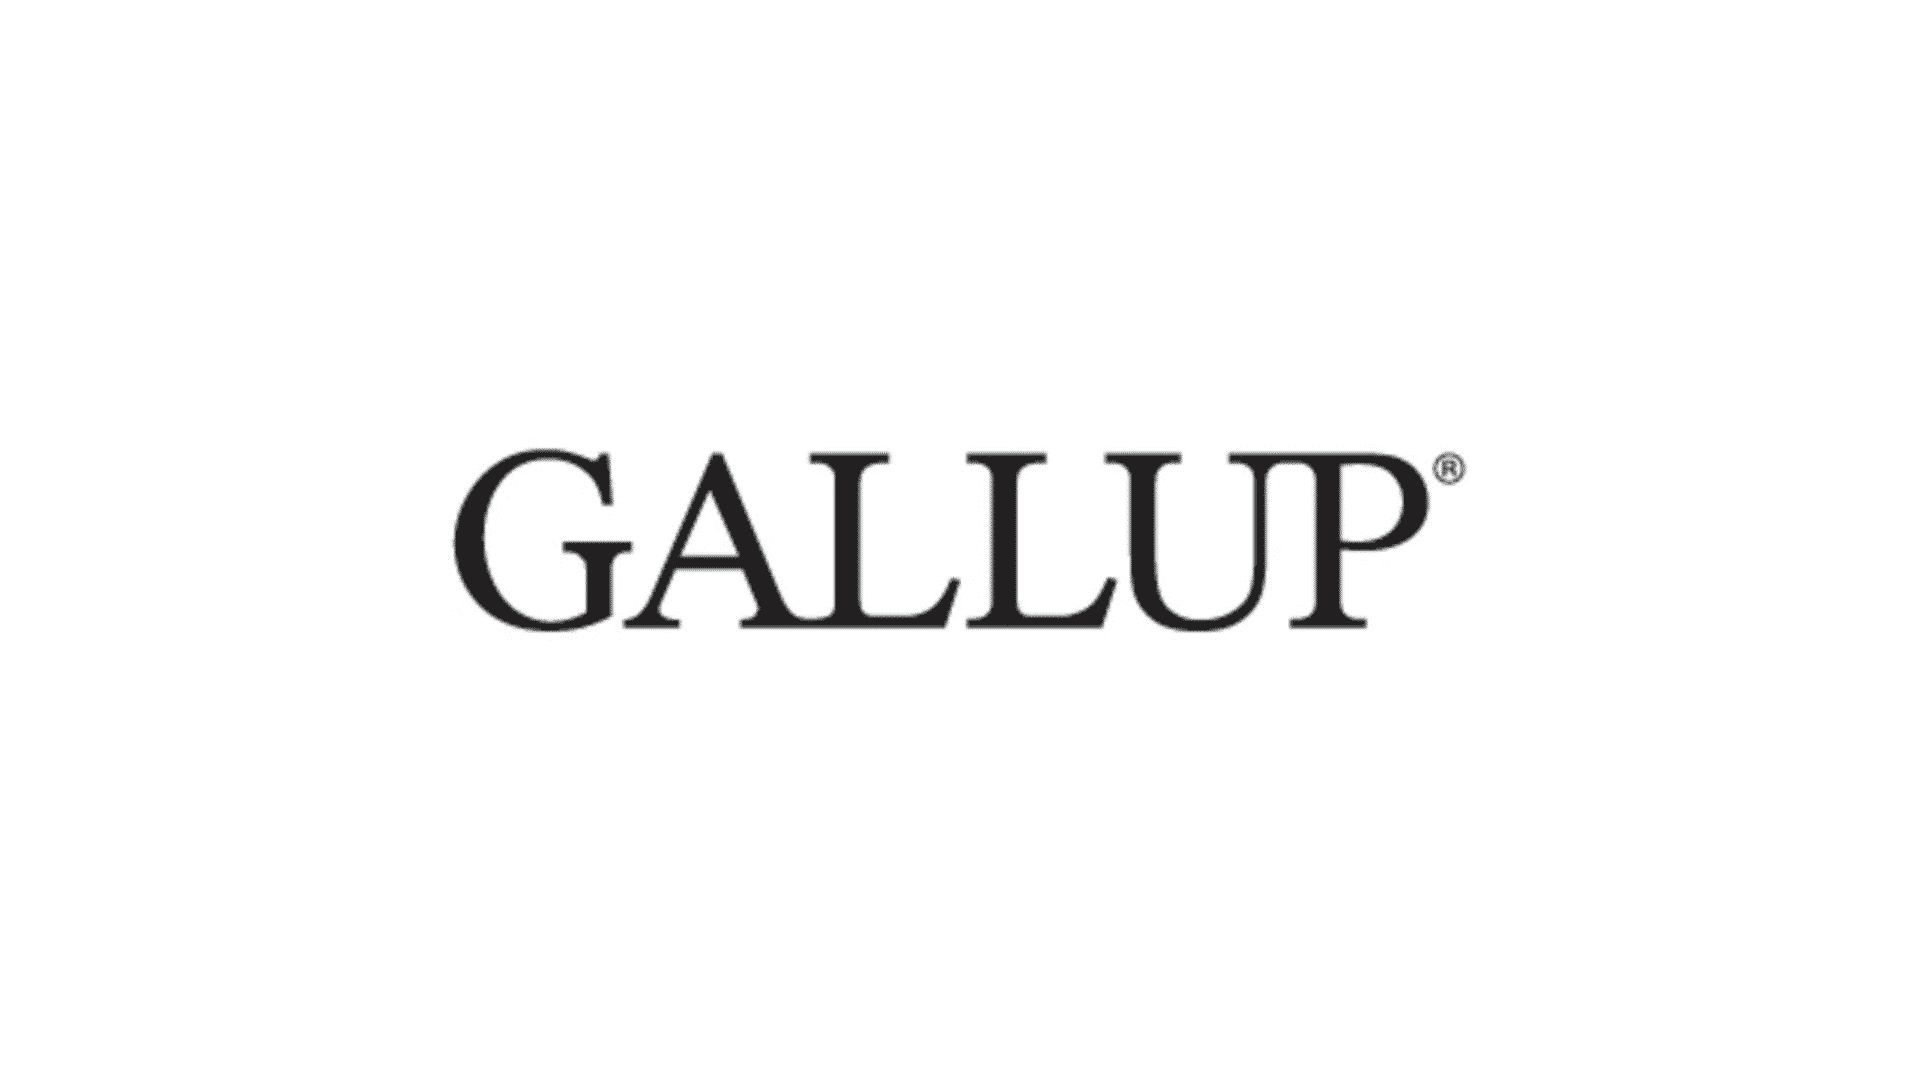 Vice President of Marketing & Business Development at Gallup